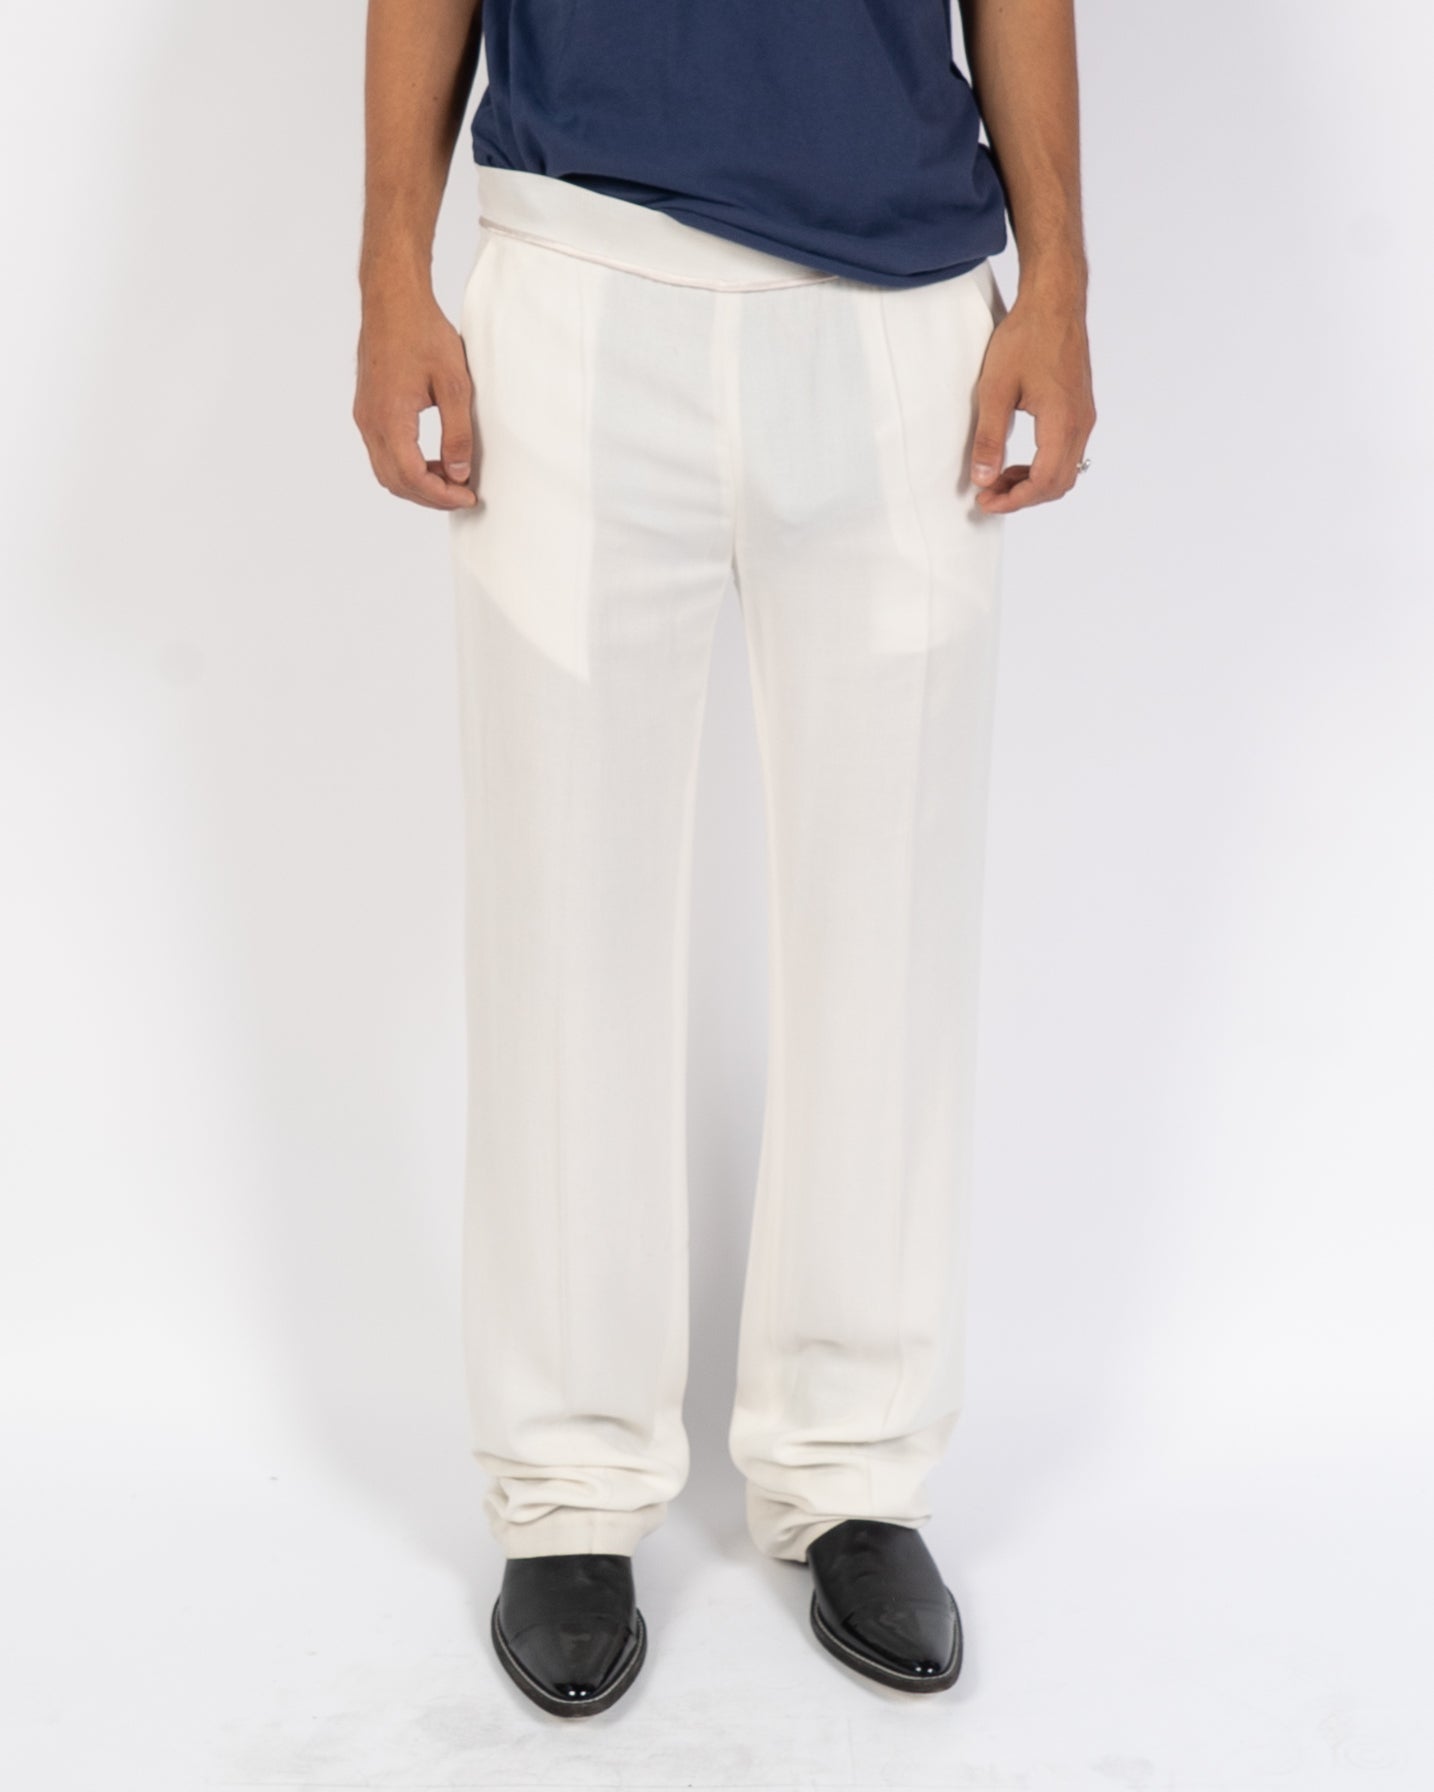 SS15 Phaseolus Ivory Trousers Sample